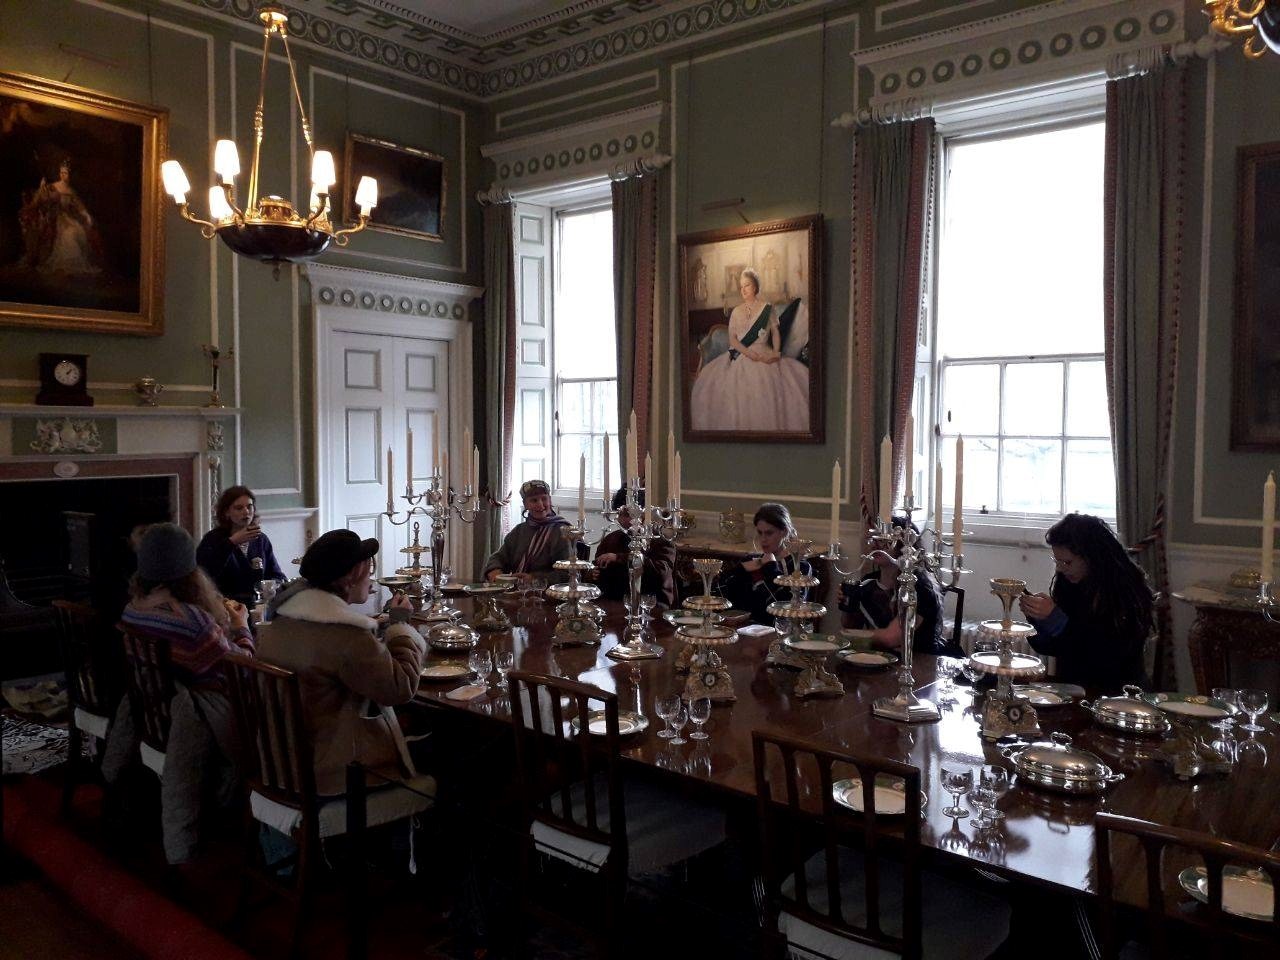 food activists occupy palace of holyroodhouse dining room